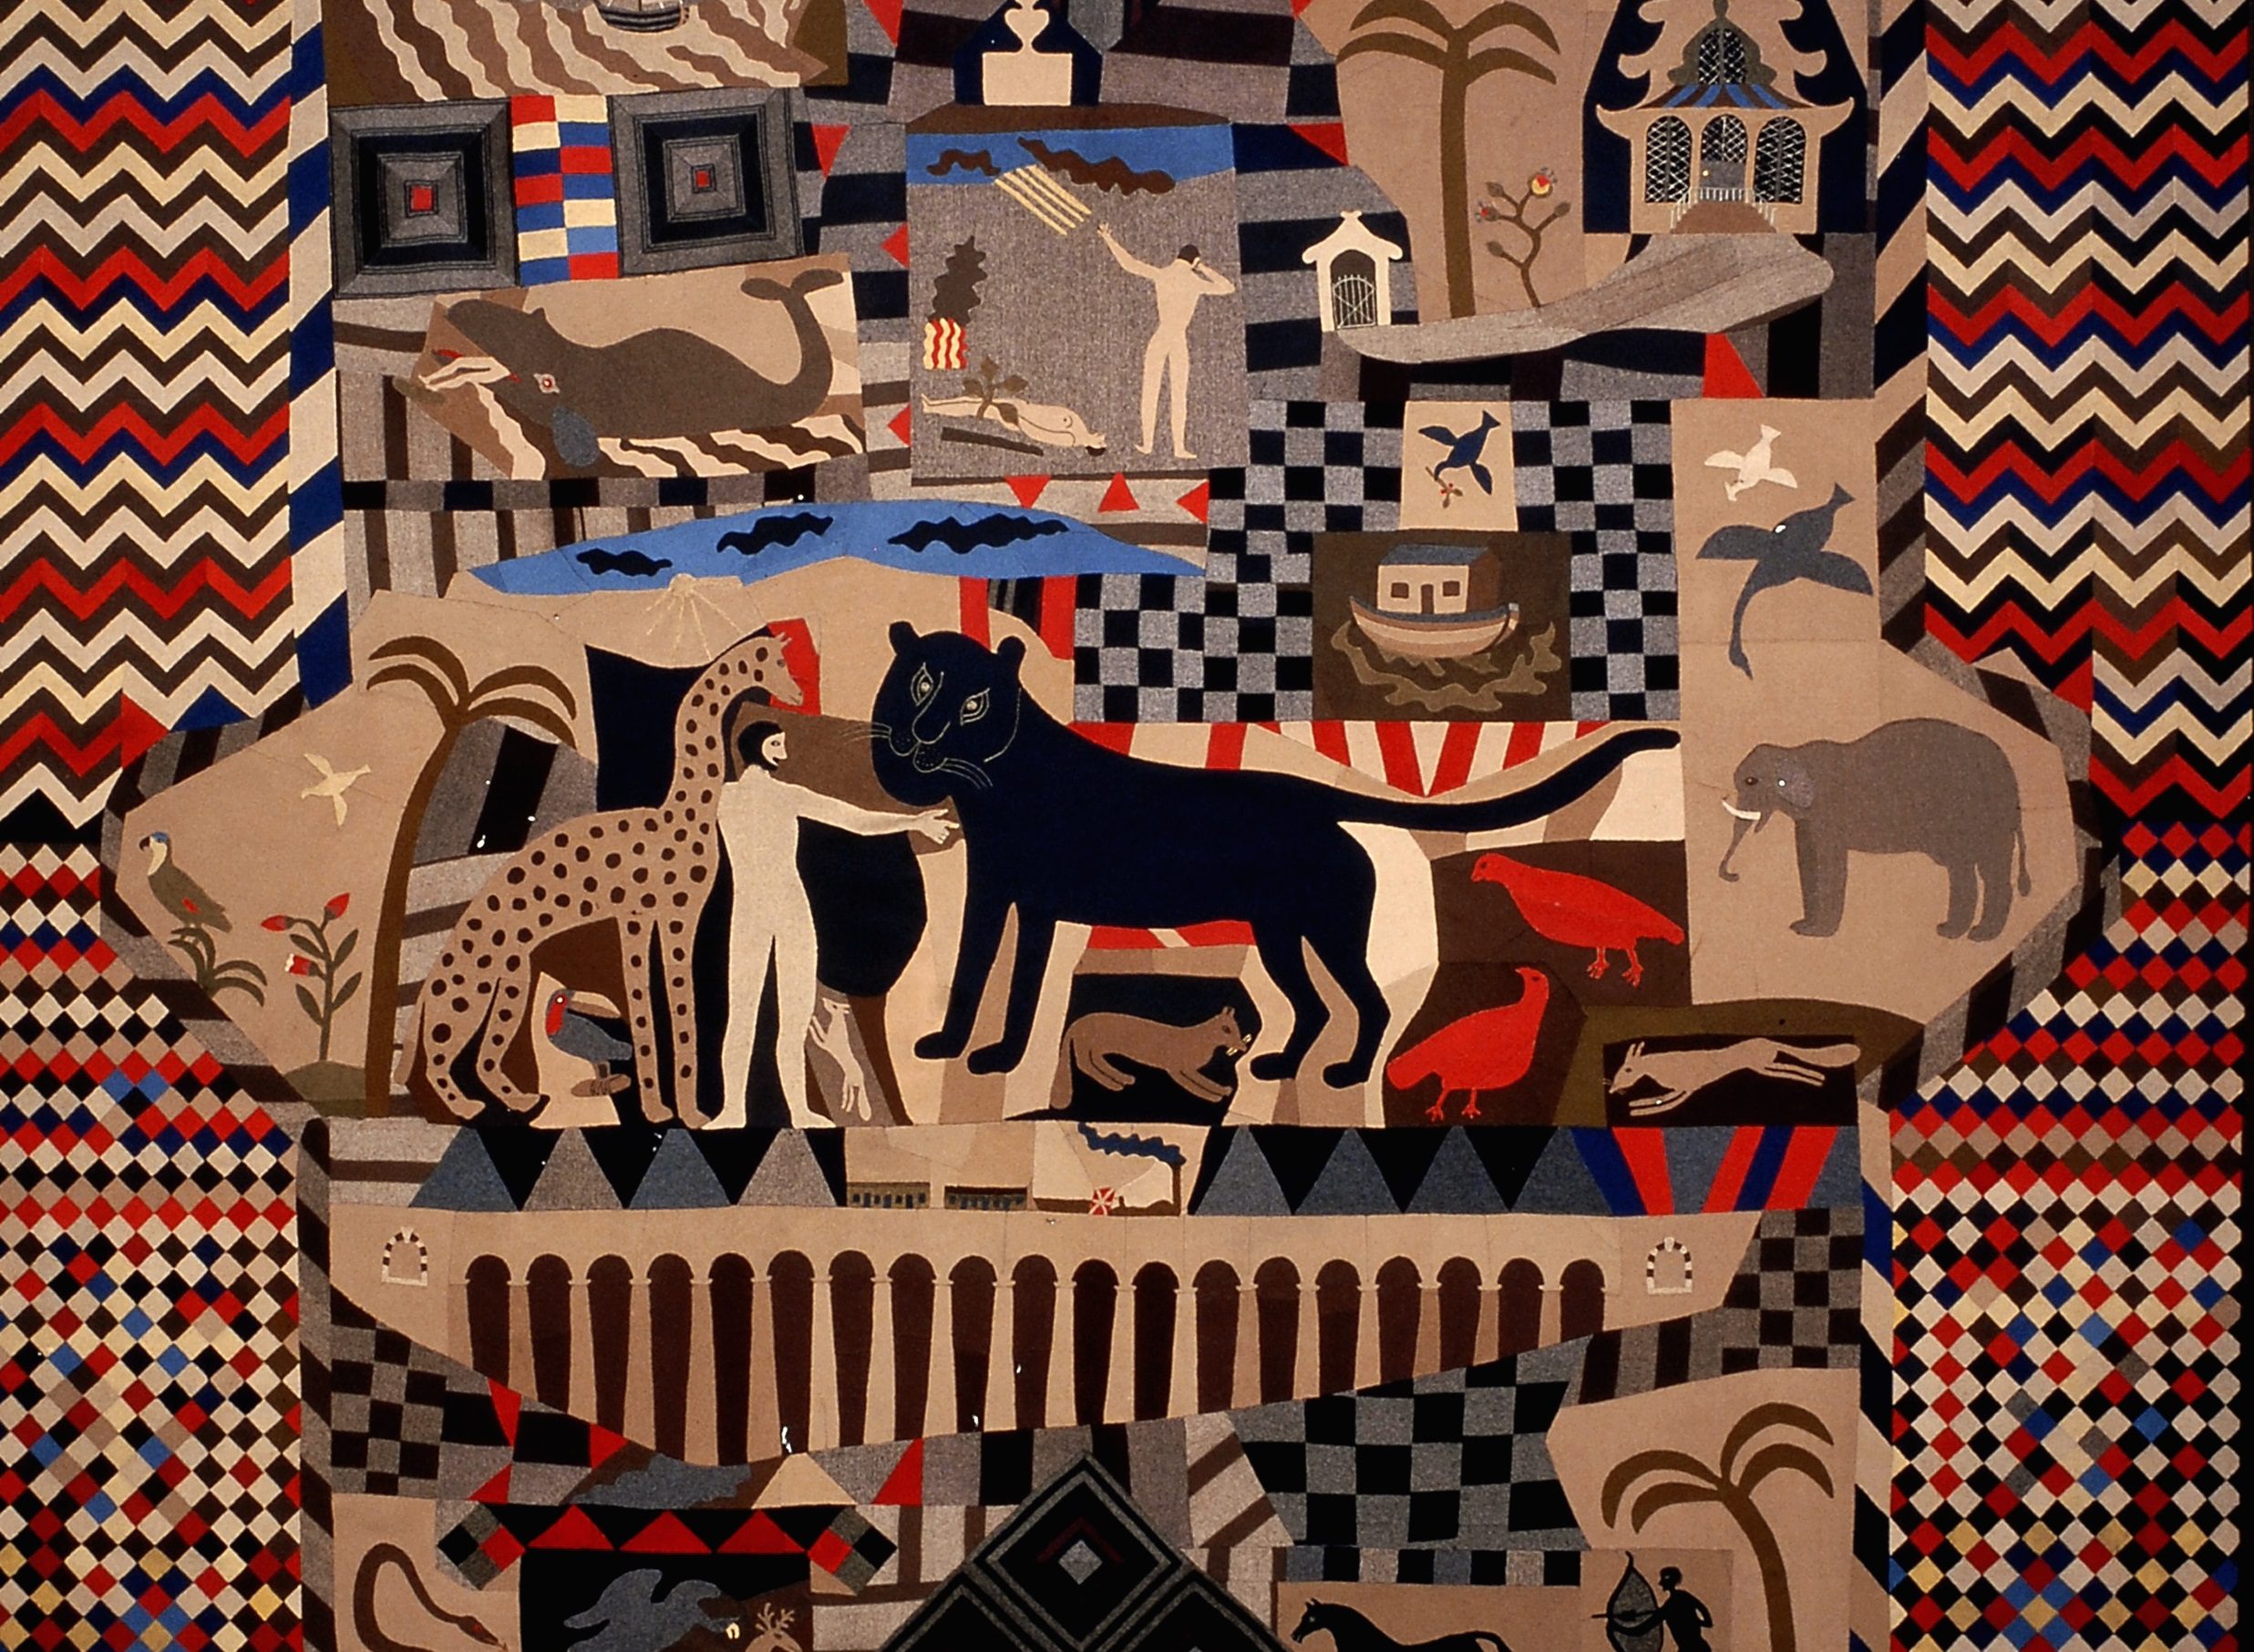 image of the quilt, red, blue and brown in colour with a men depicted with animals